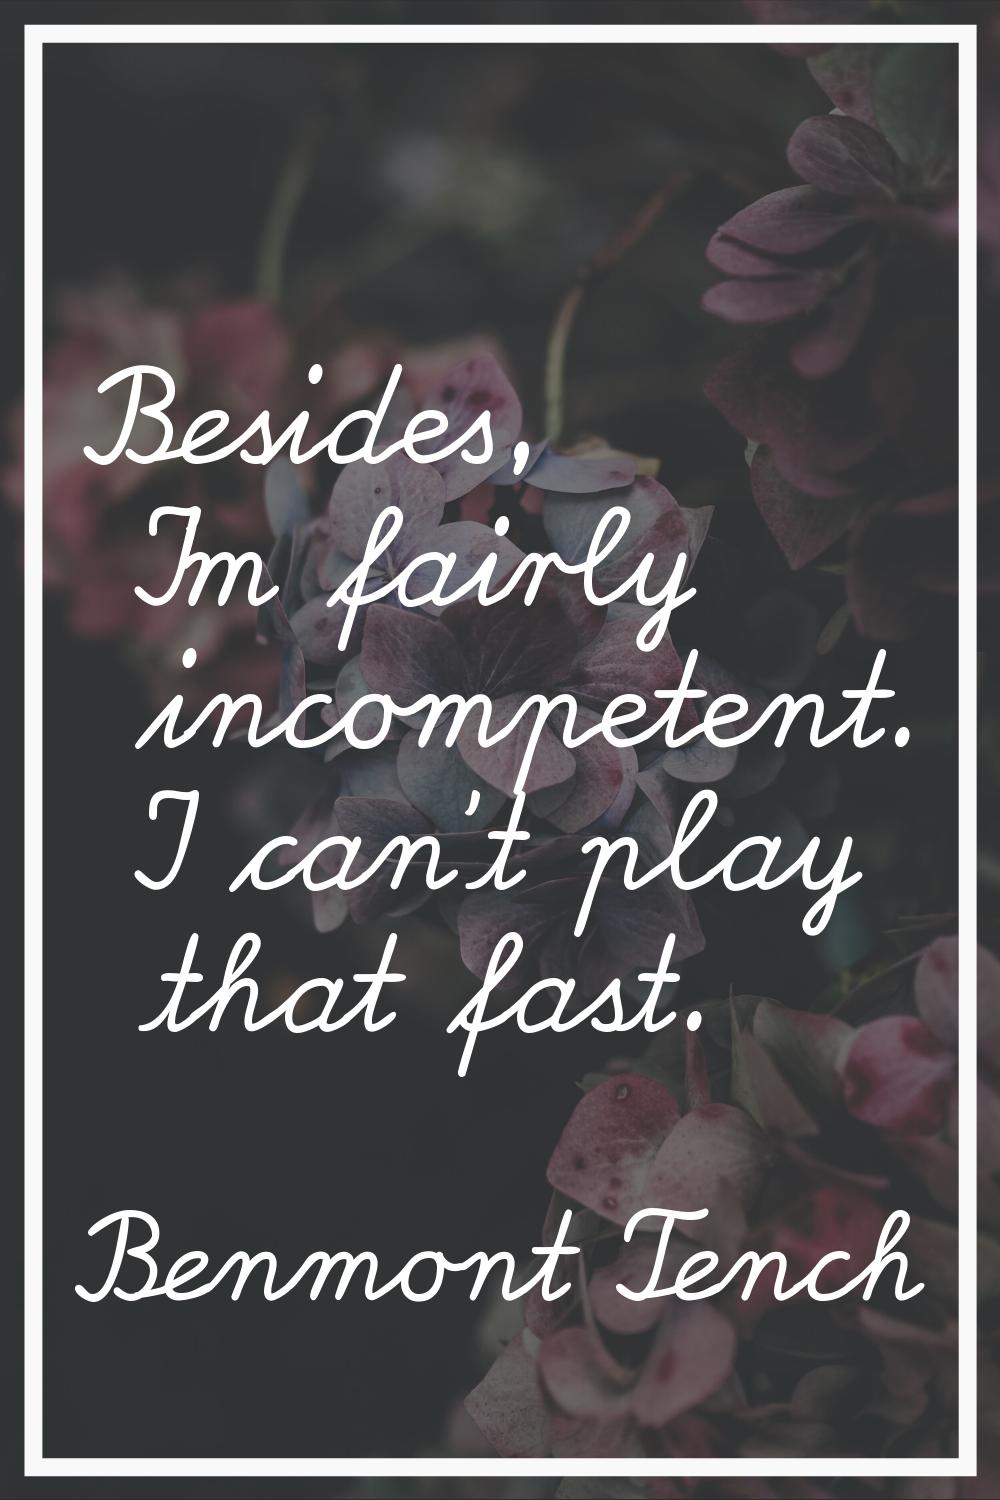 Besides, I'm fairly incompetent. I can't play that fast.